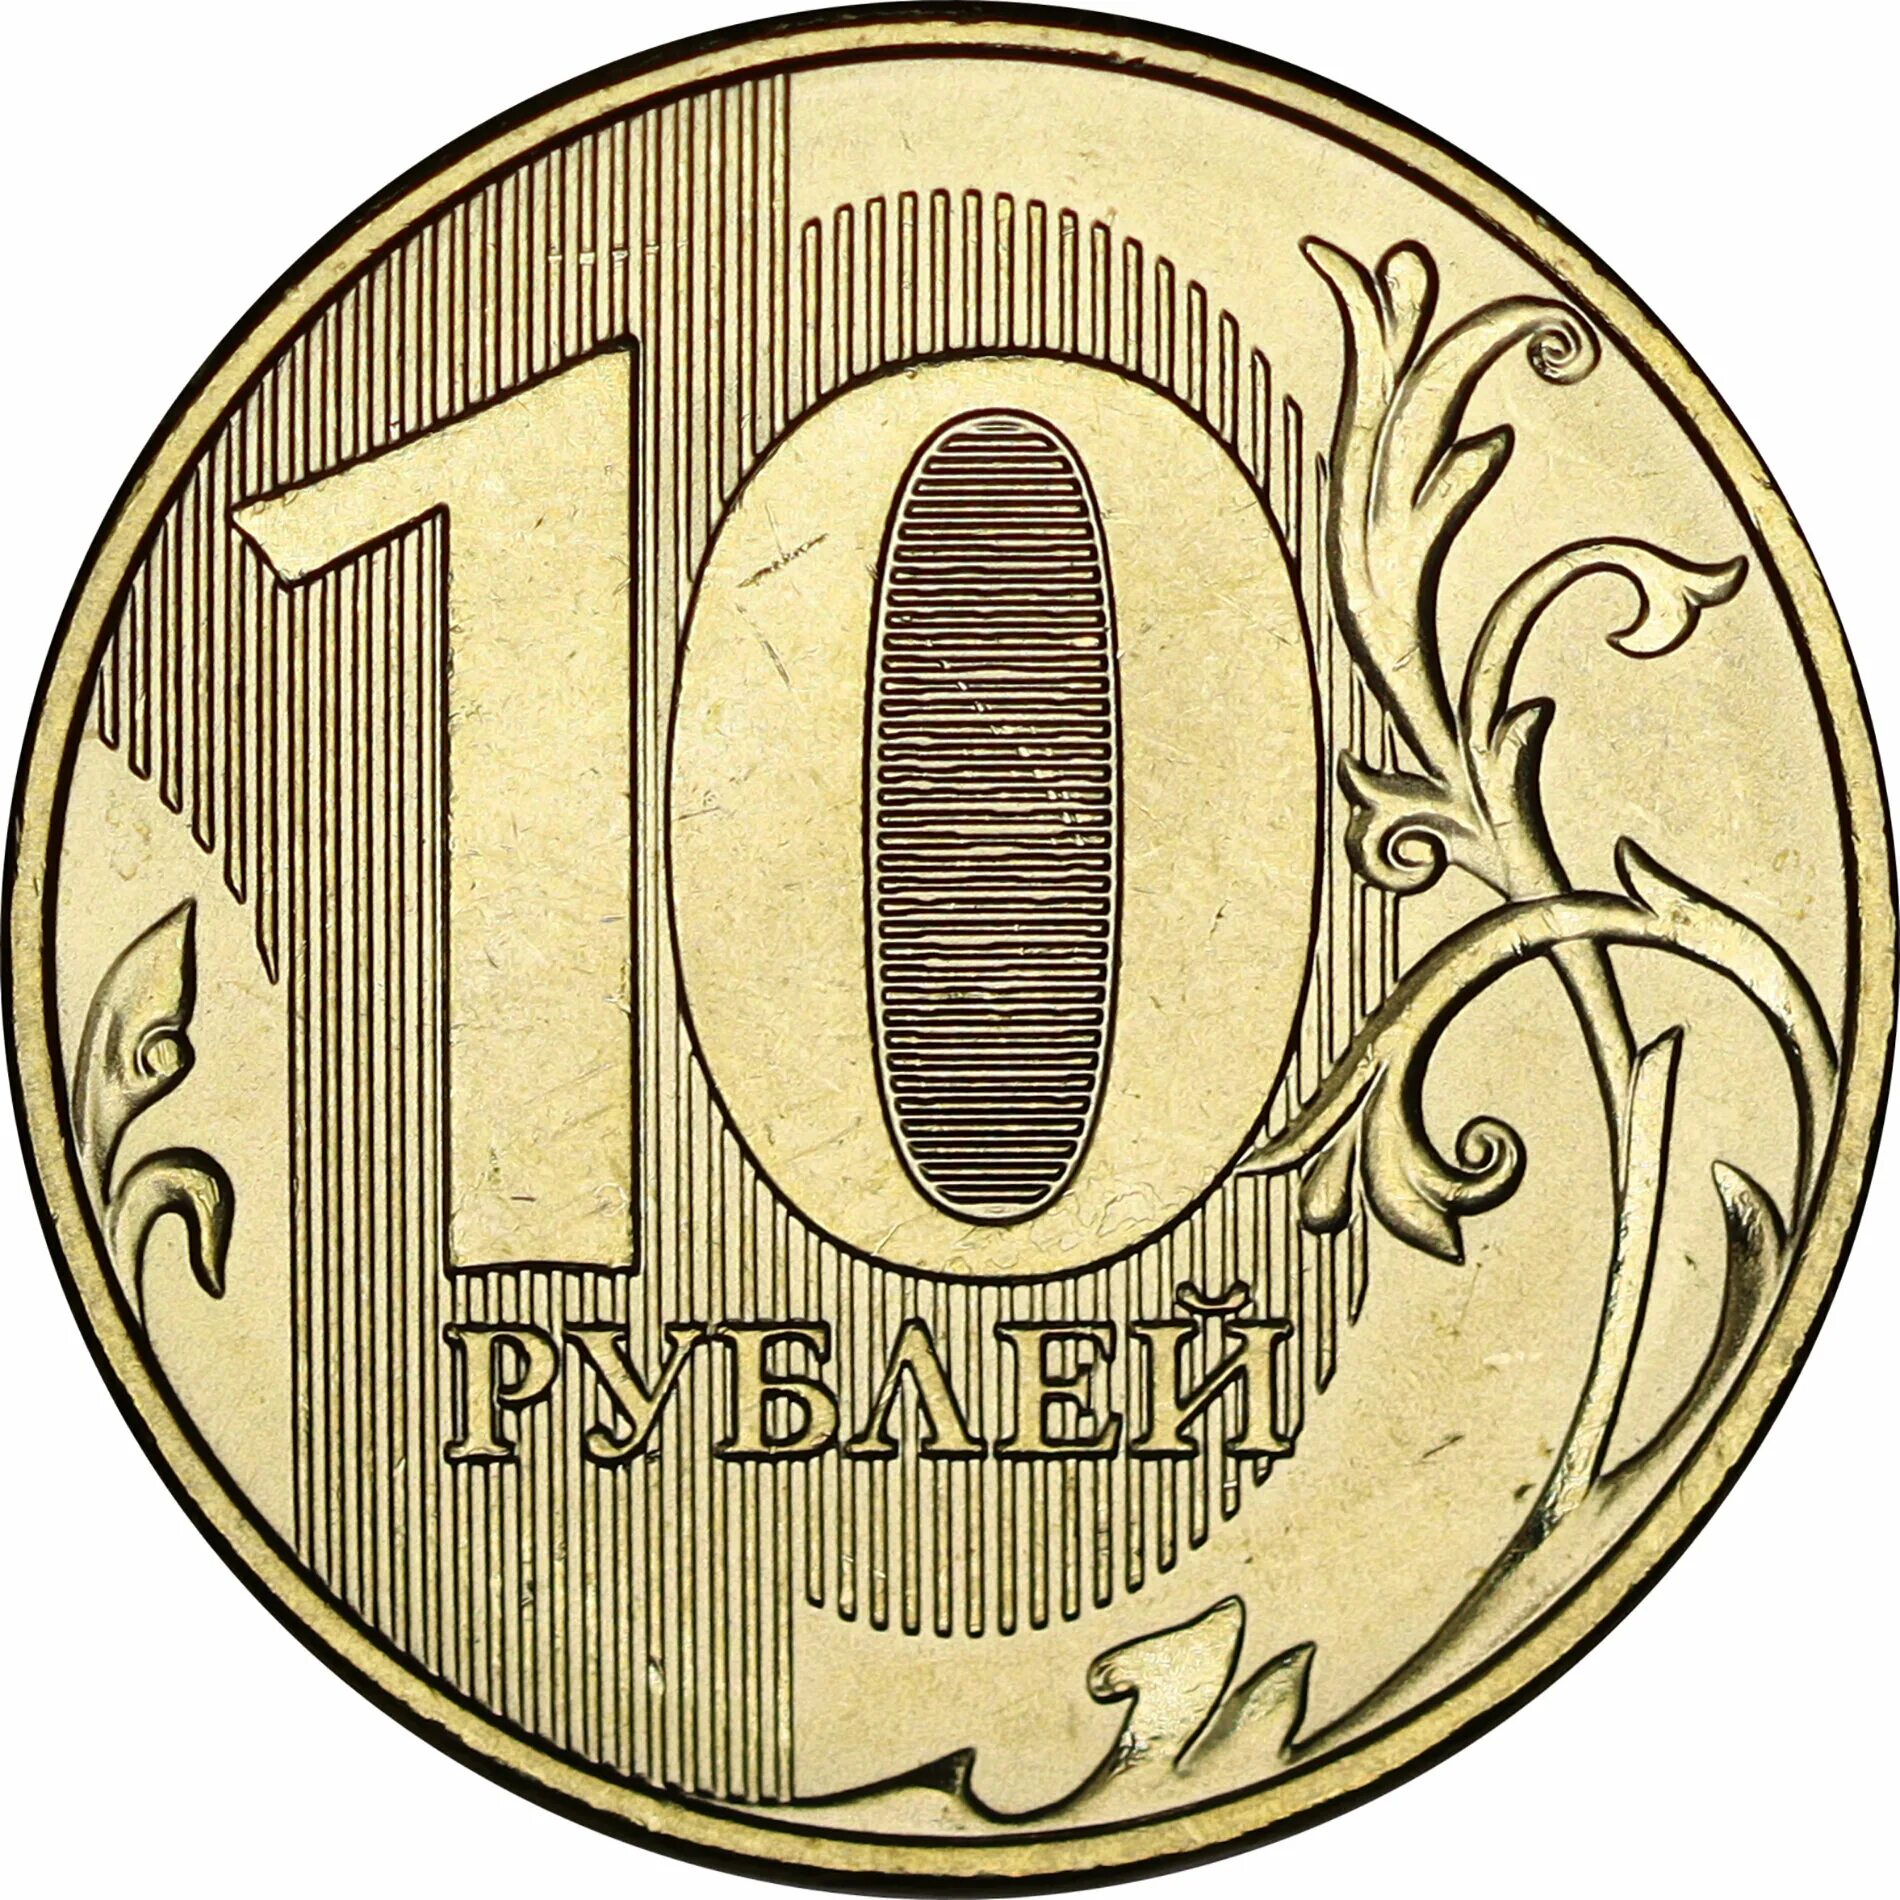 10 ruble coin #3